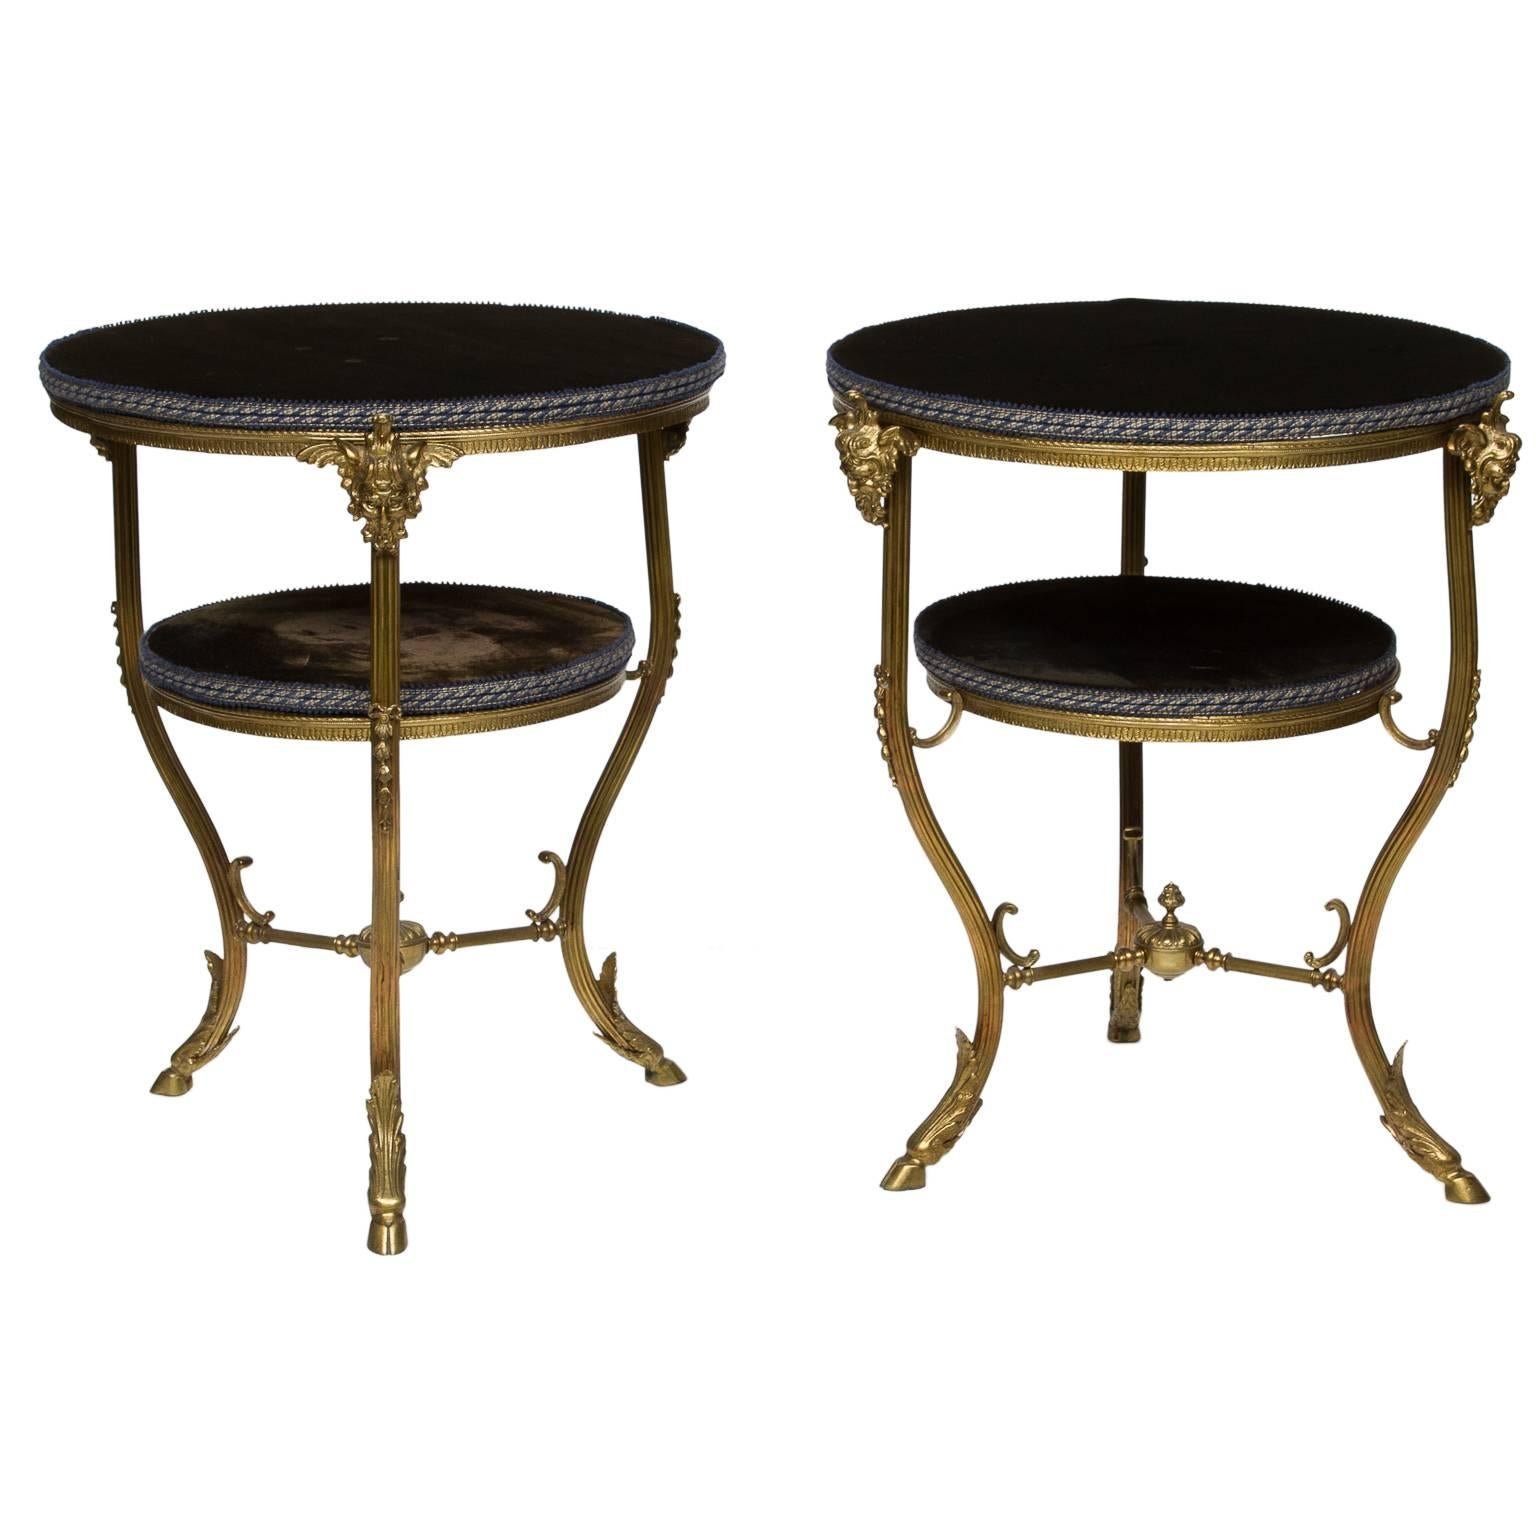 Pair of Italian Ormolu and Brass Two-Tiered Side Tables